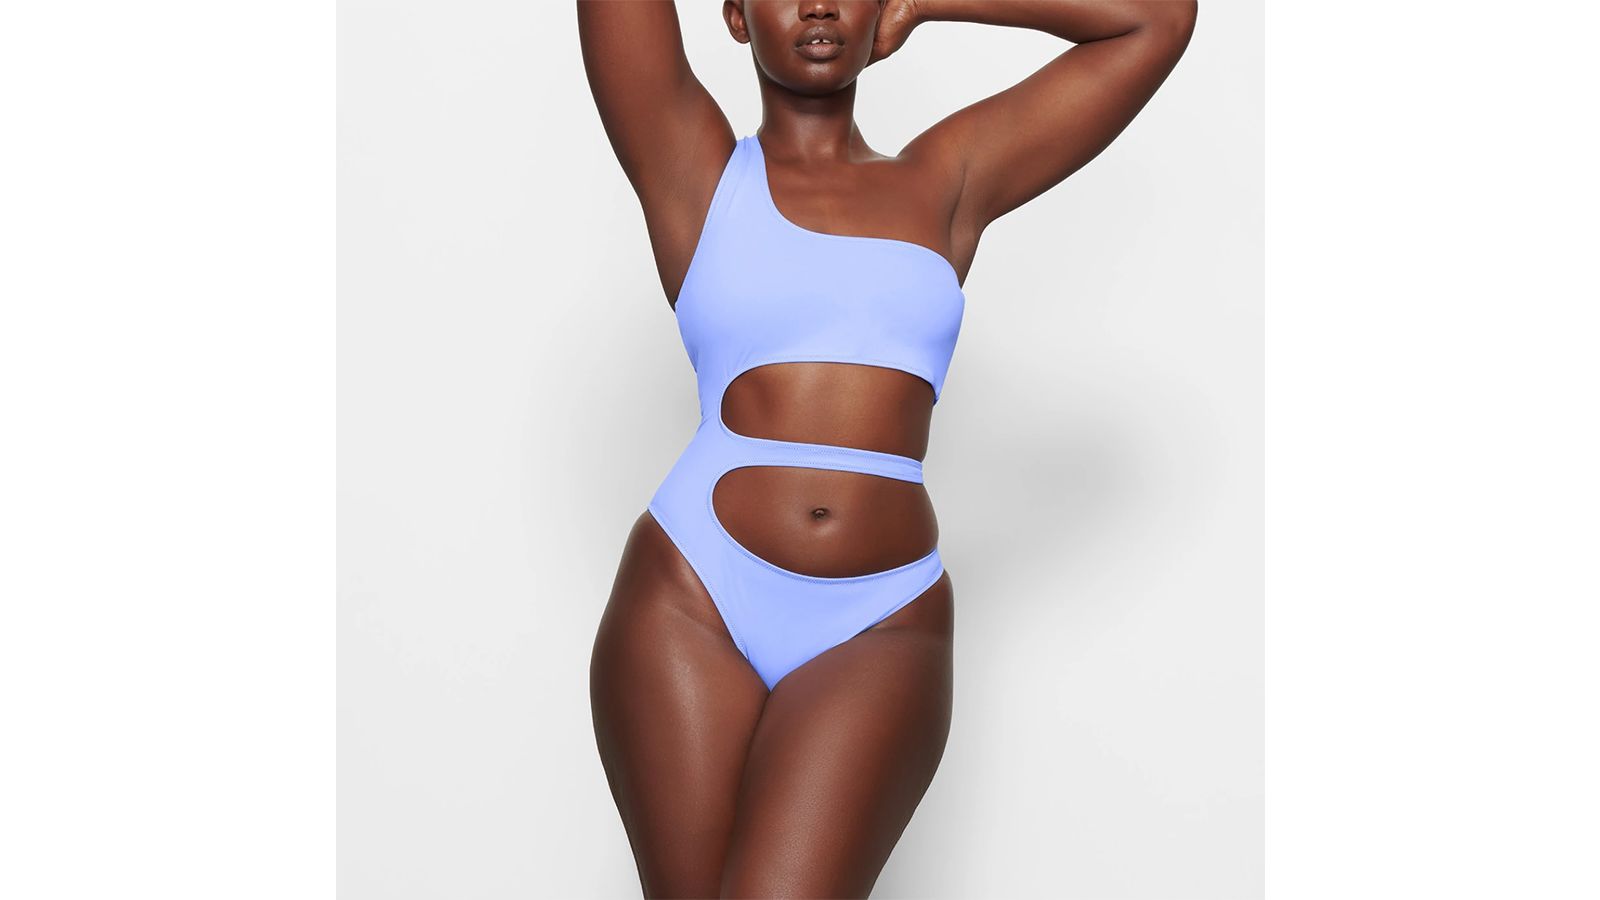 JUST LAUNCHED: SKIMS Swim. The wait is over: our most anticipated